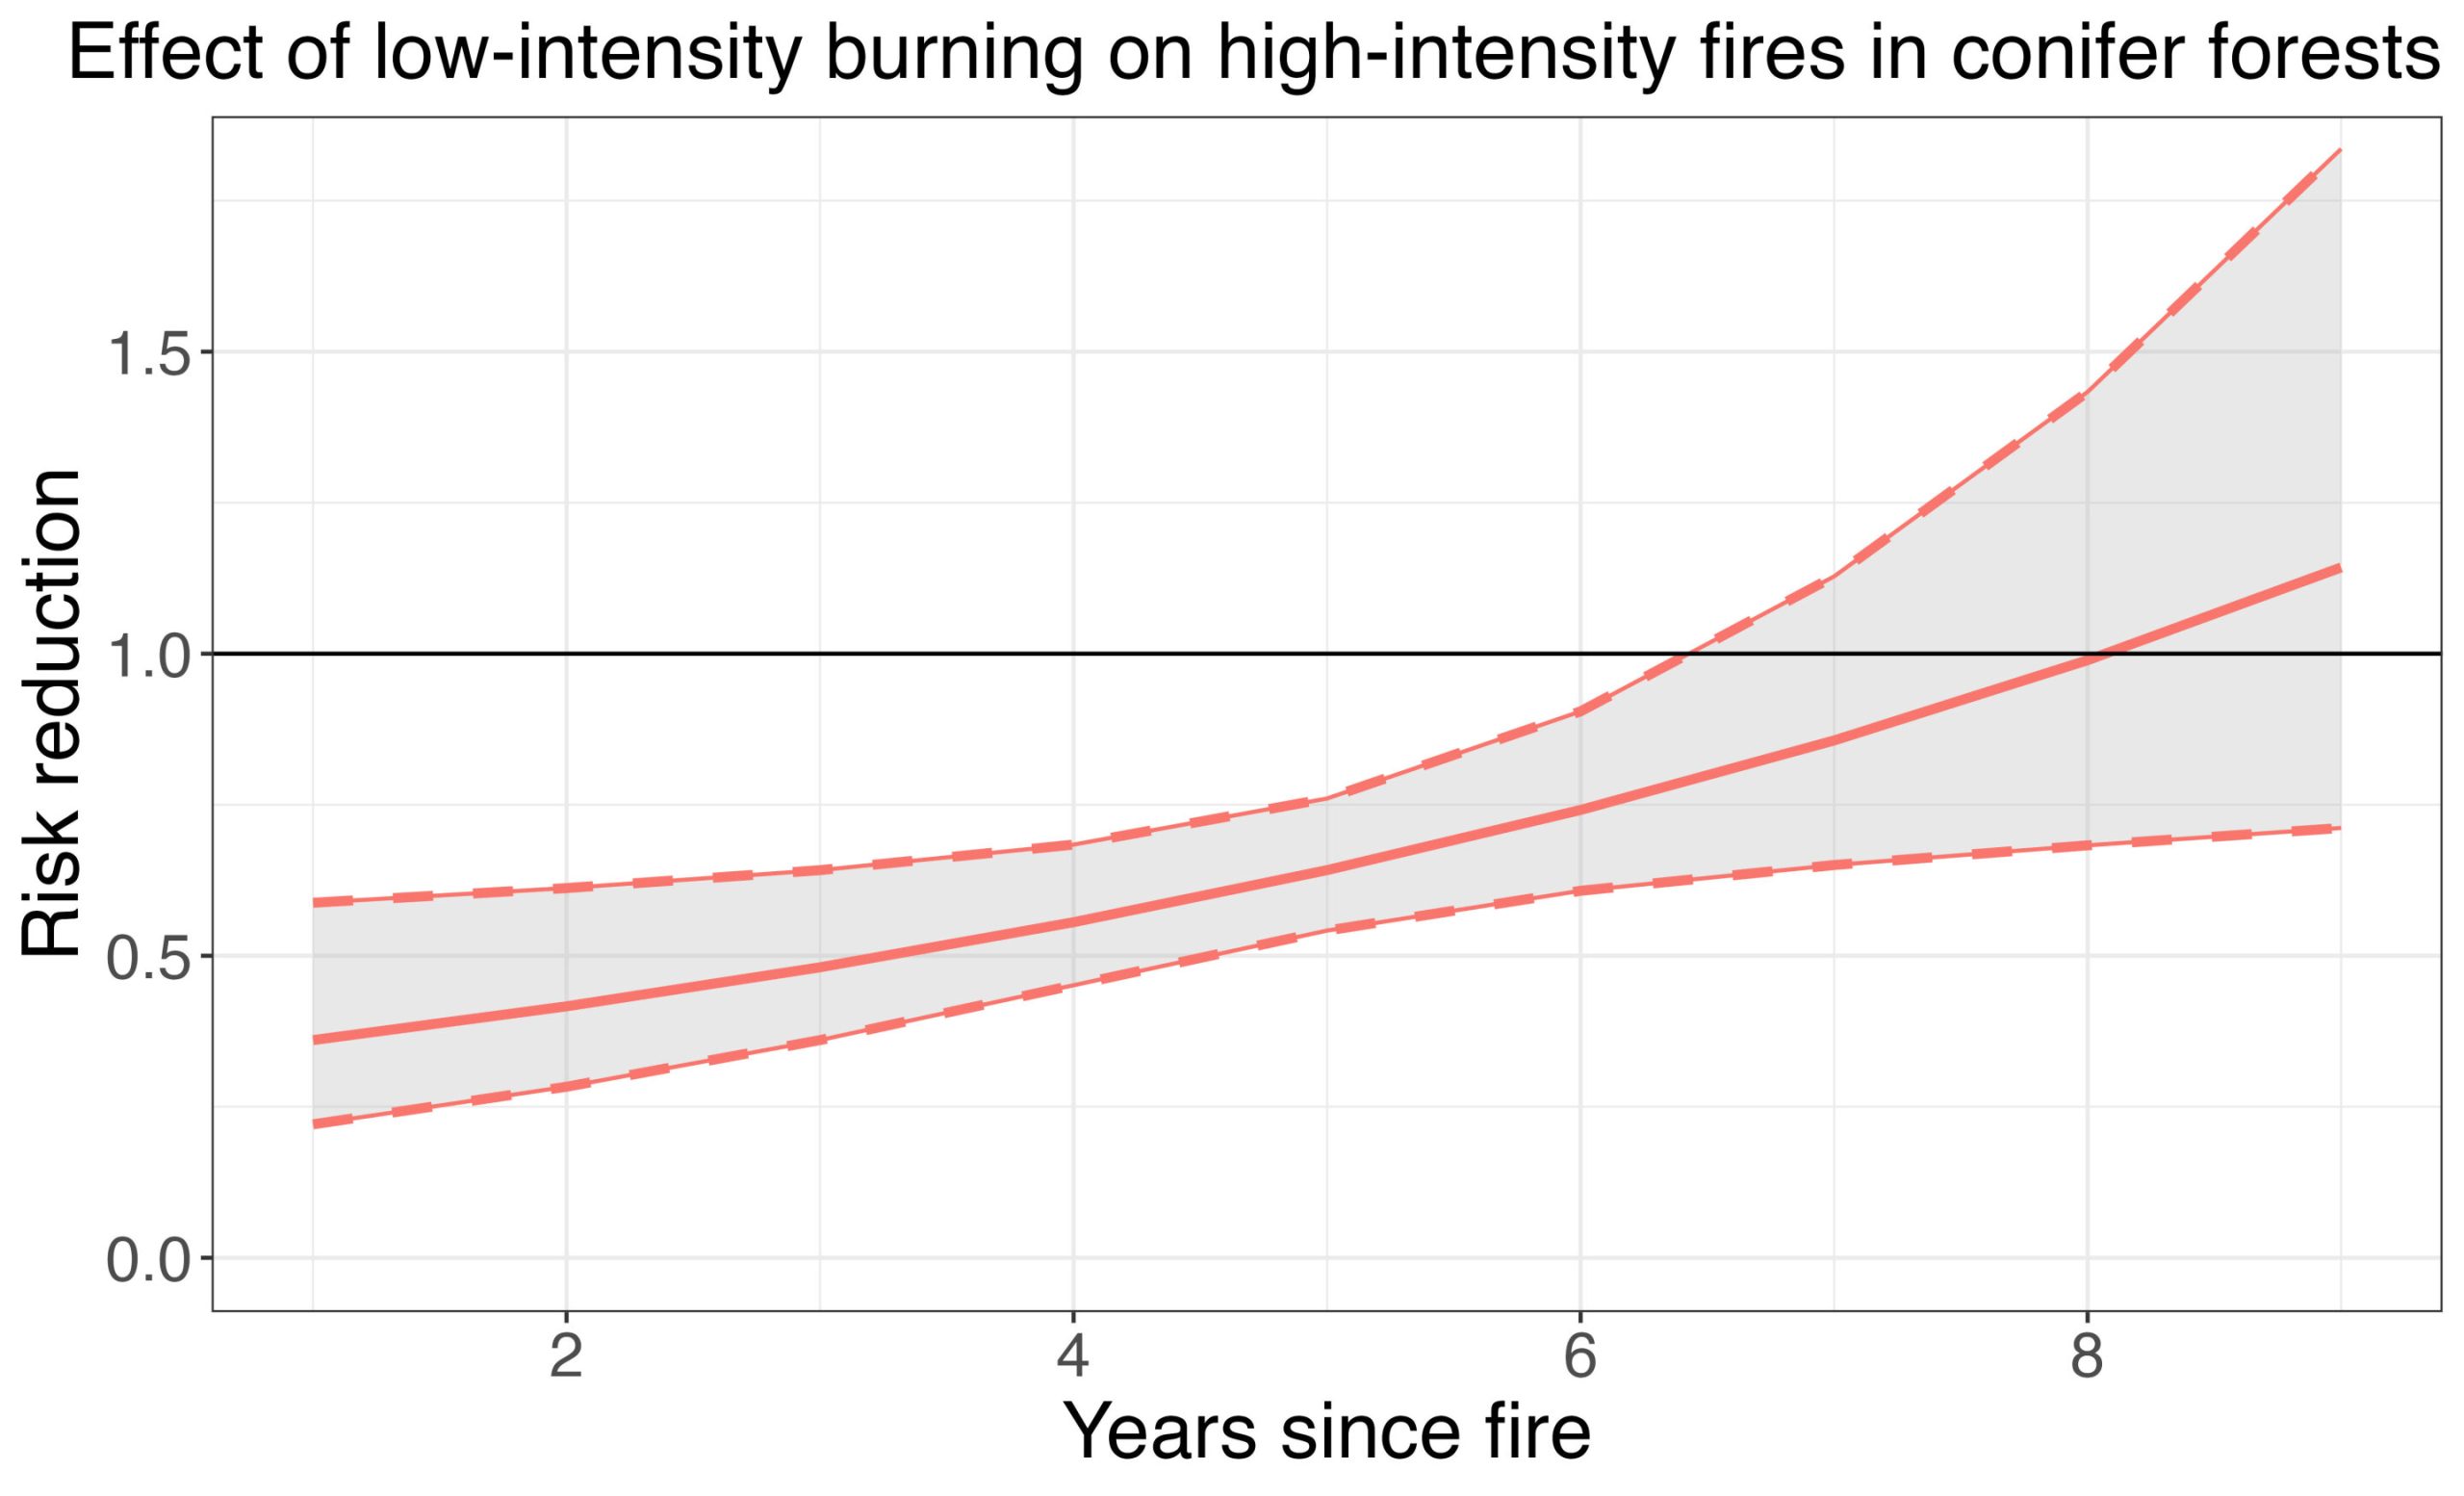 Low-intensity fires reduce wildfire risk by 60%, according to study